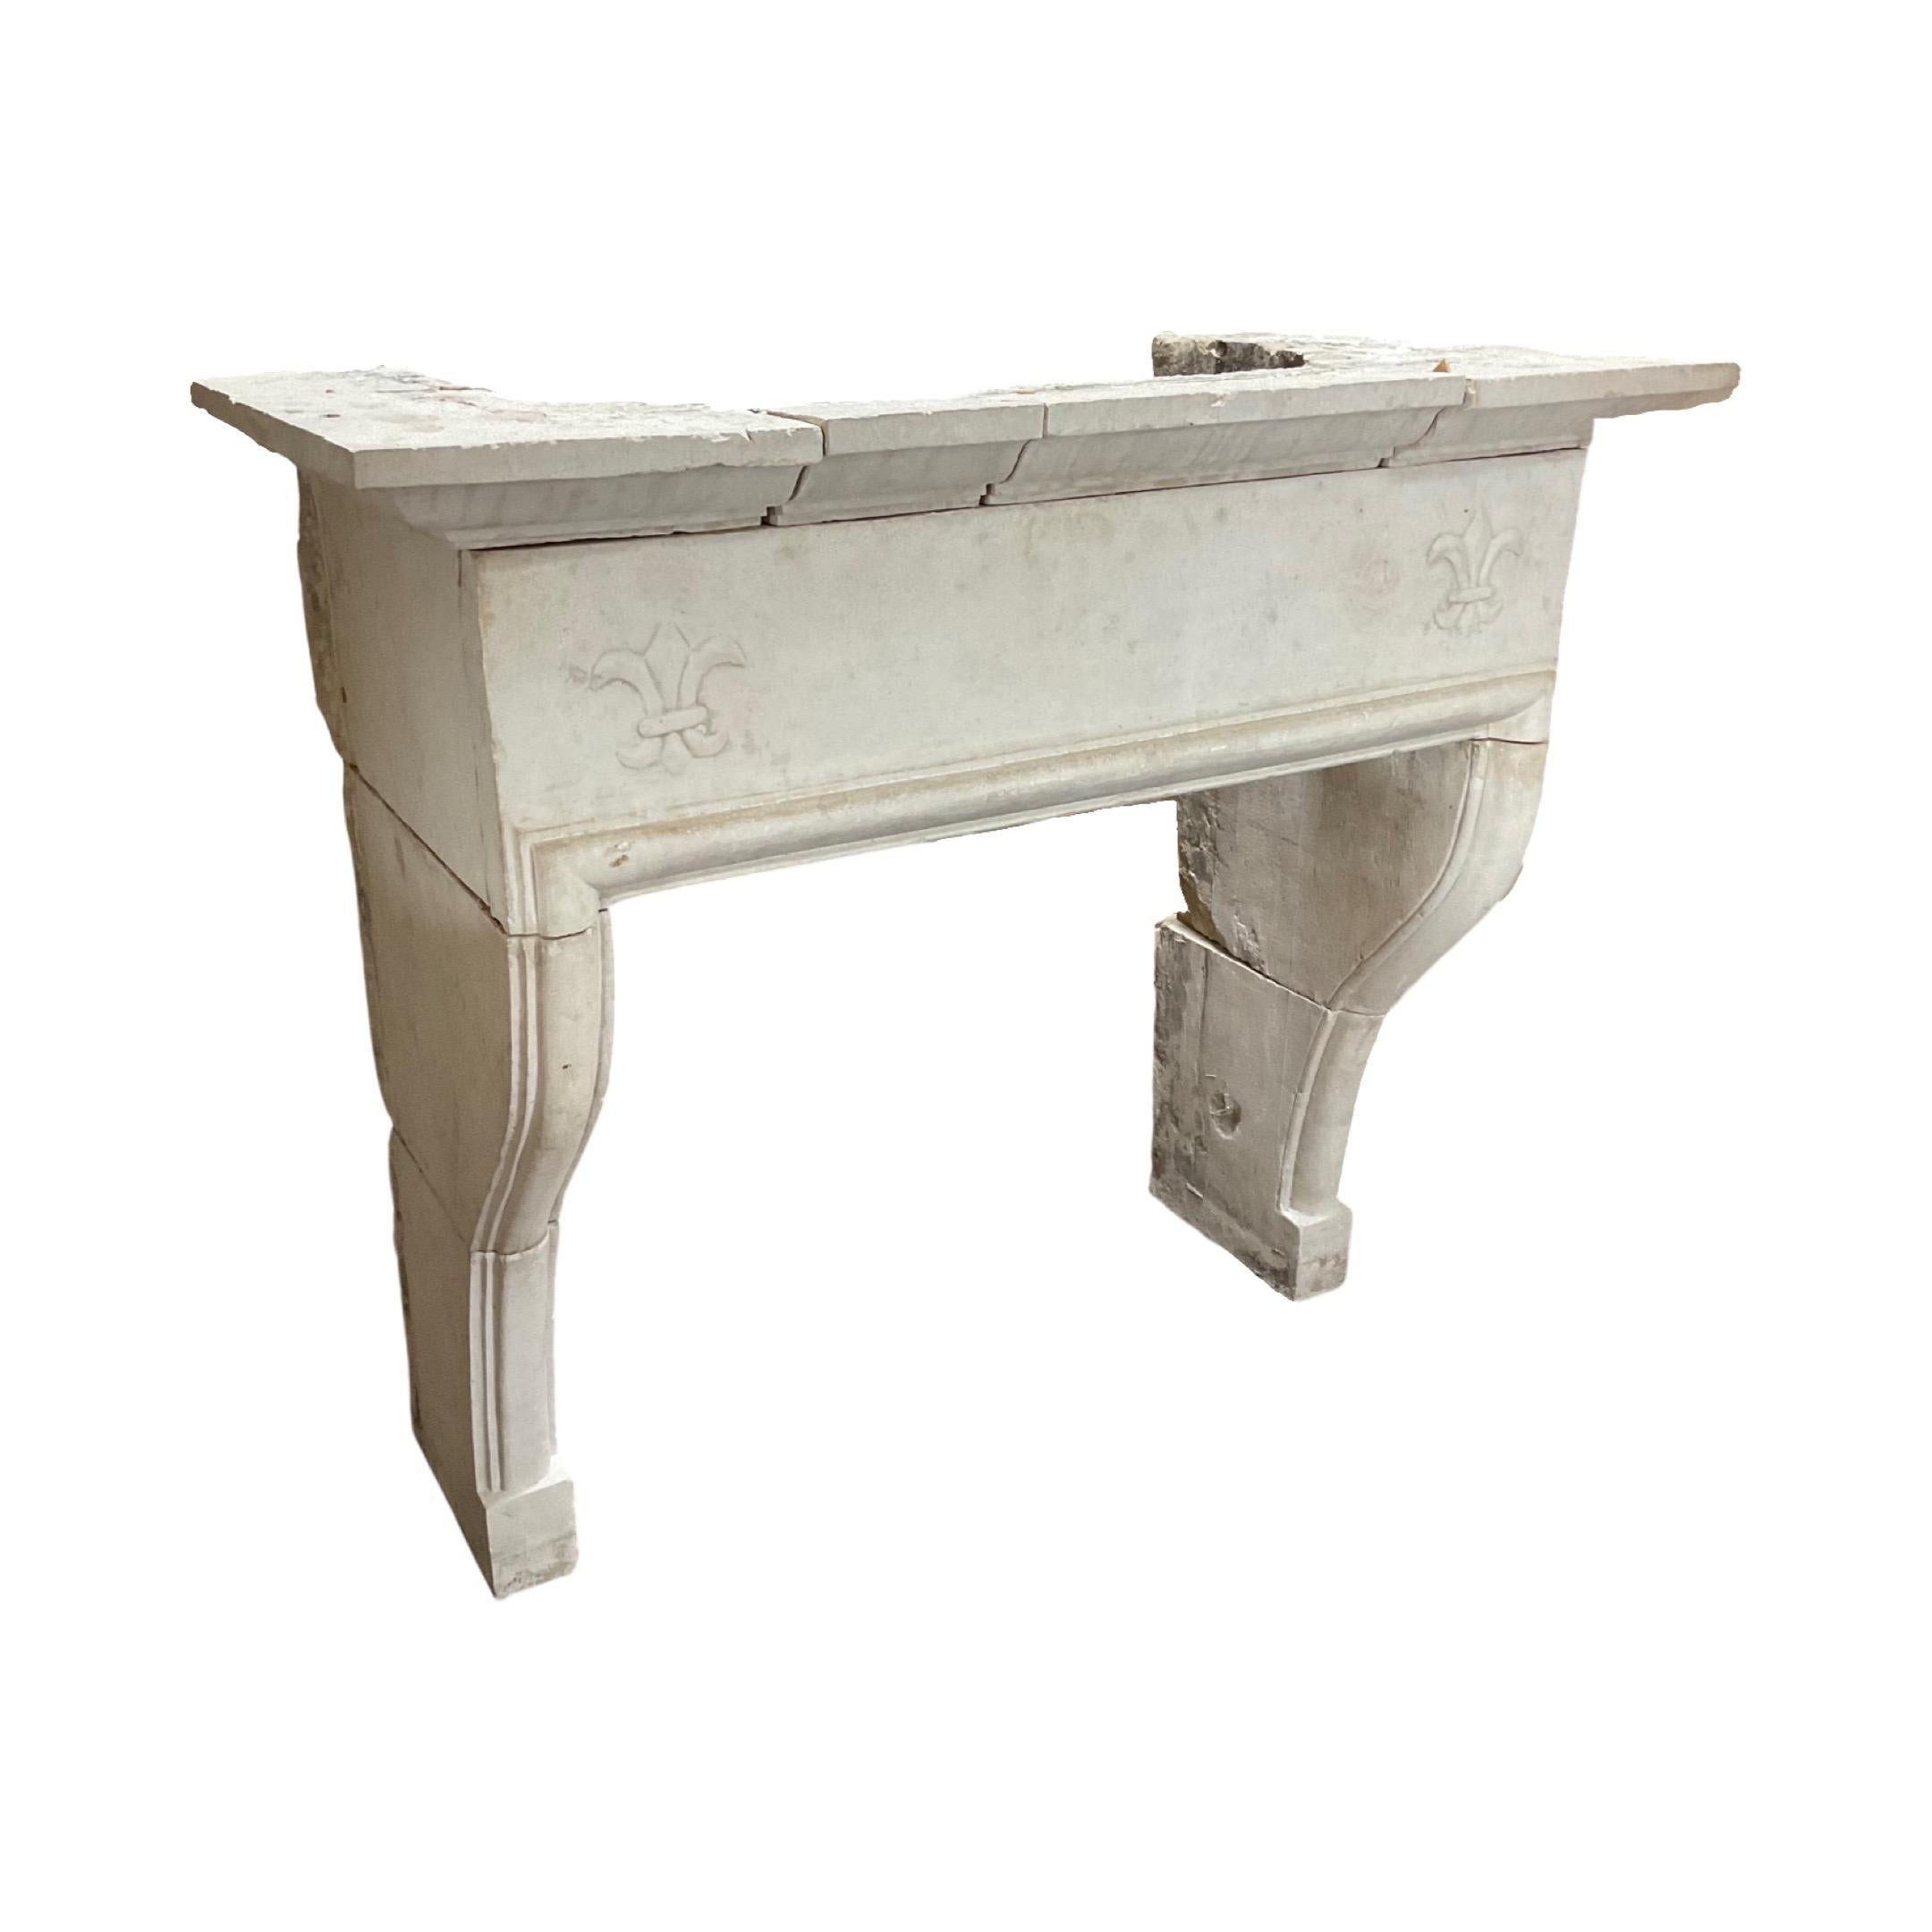 This French Limestone Mantel is a genuine piece of history, dating back to the 17th century. With a classic Louis XVI style, it is the perfect addition to any home. Crafted from 100% limestone, it is sure to stand the test of time and provide